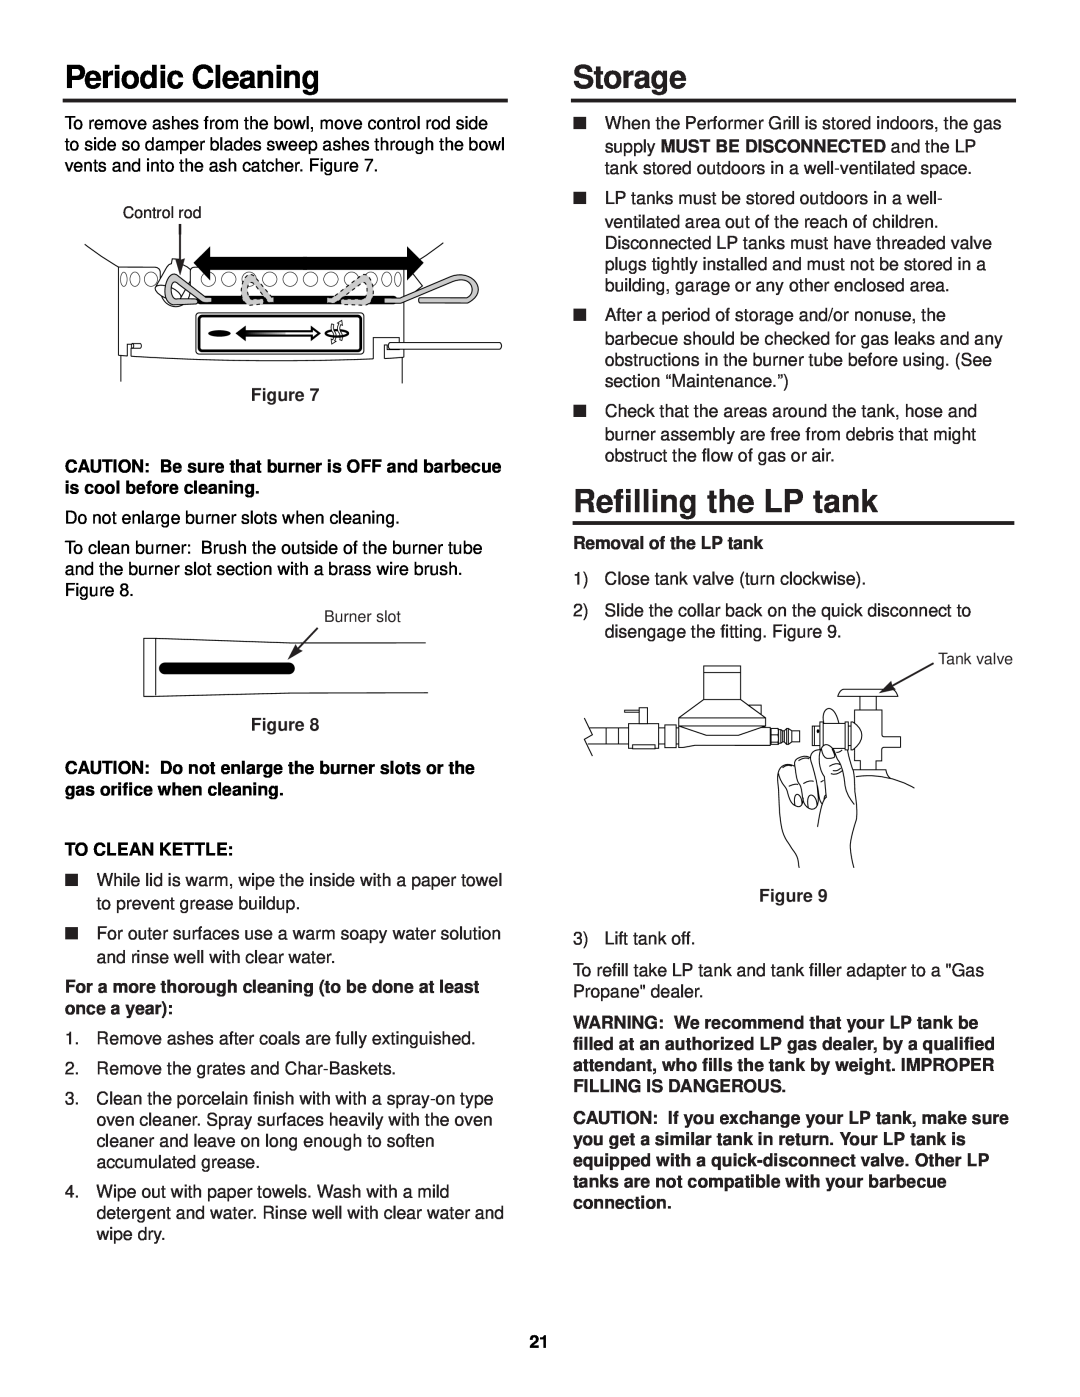 Weber Burner owner manual Periodic Cleaning, Storage, Refilling the LP tank, To Clean Kettle, Removal of the LP tank 